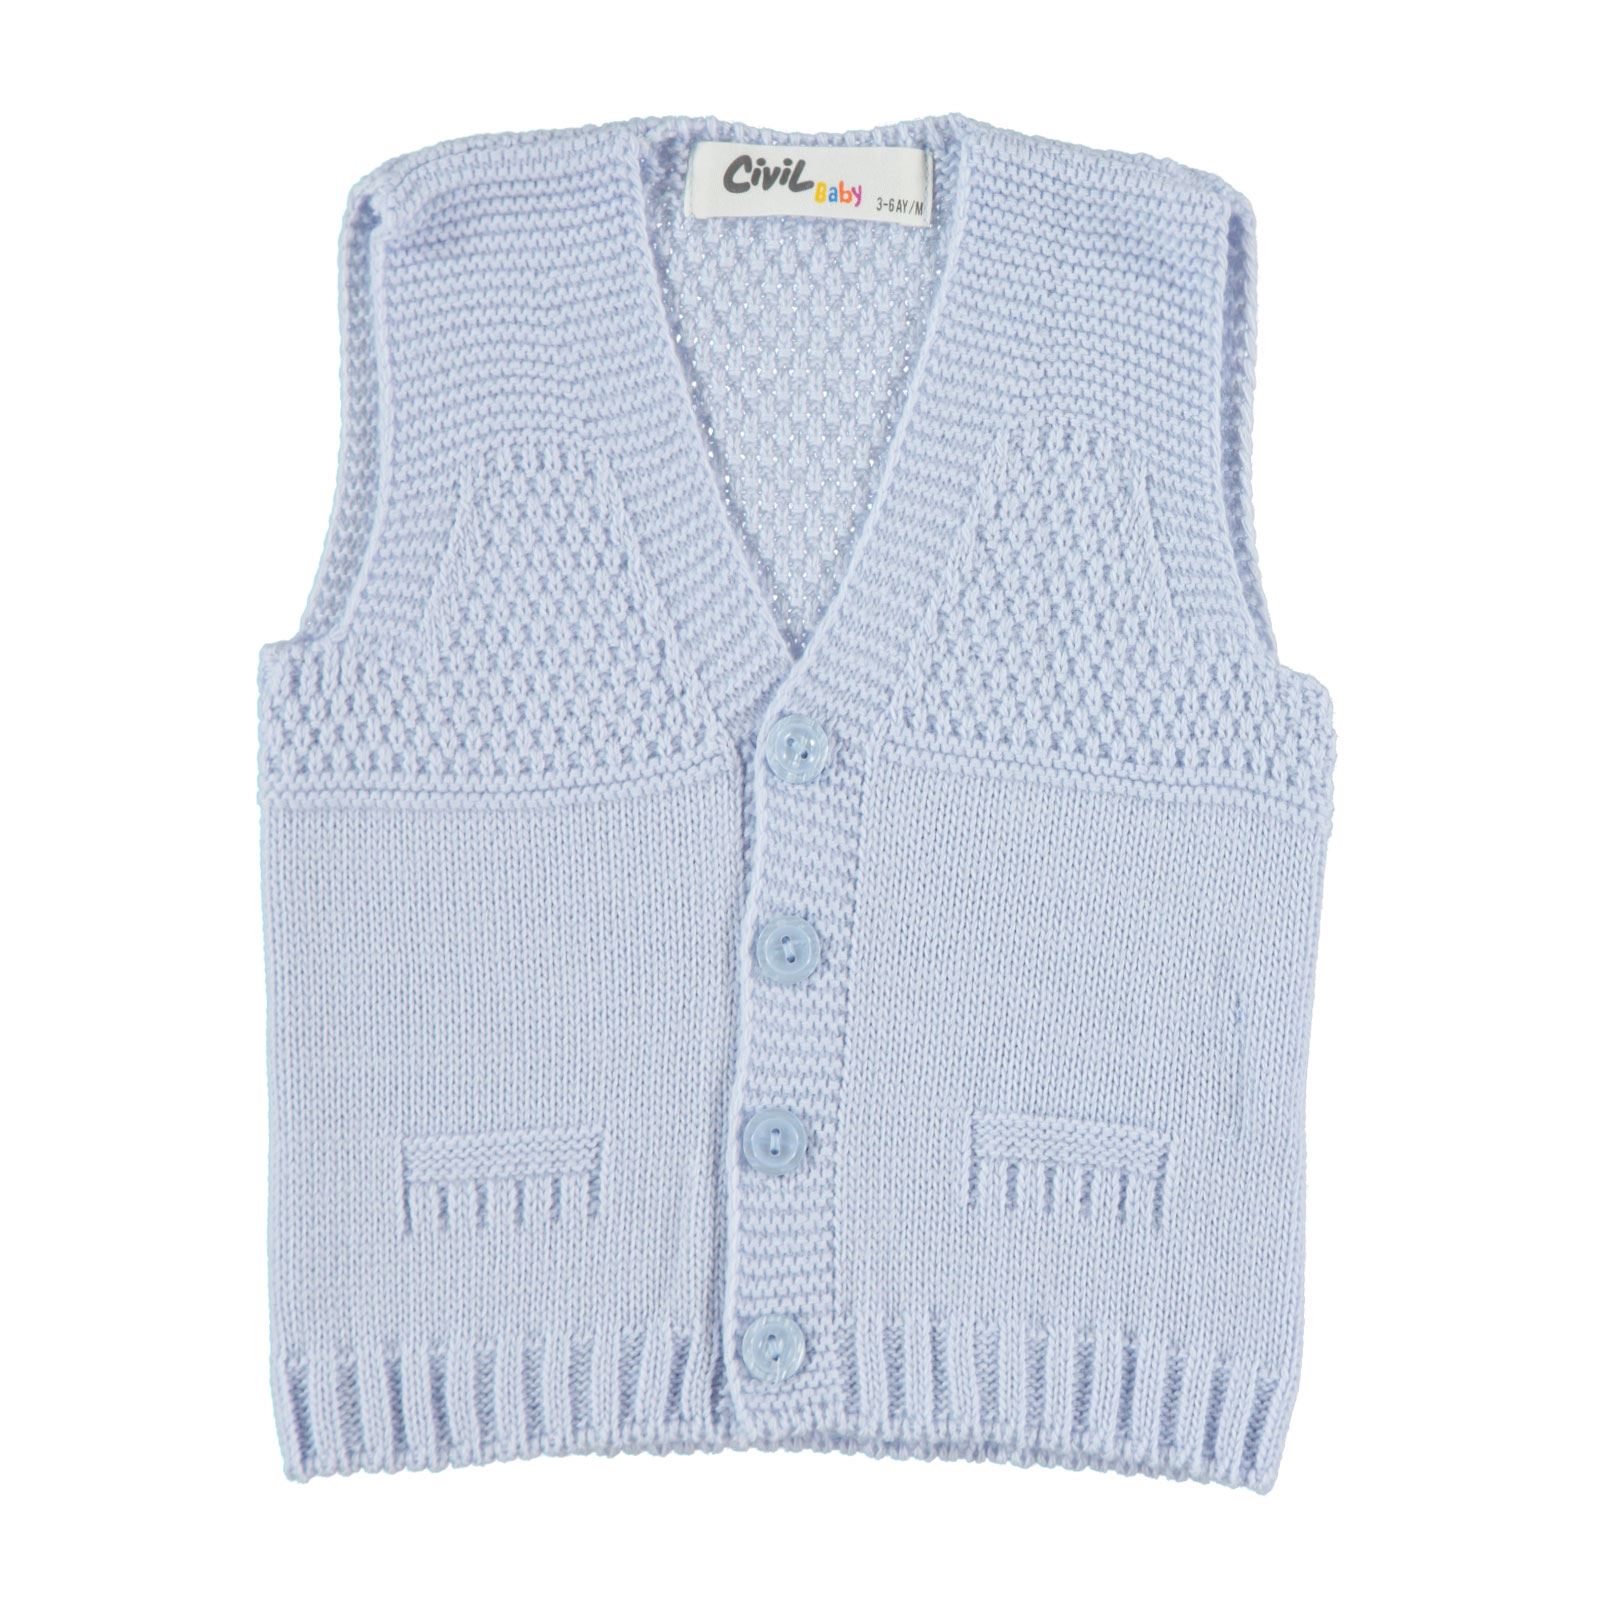 Baby blue sweater vest forexpros futures world index